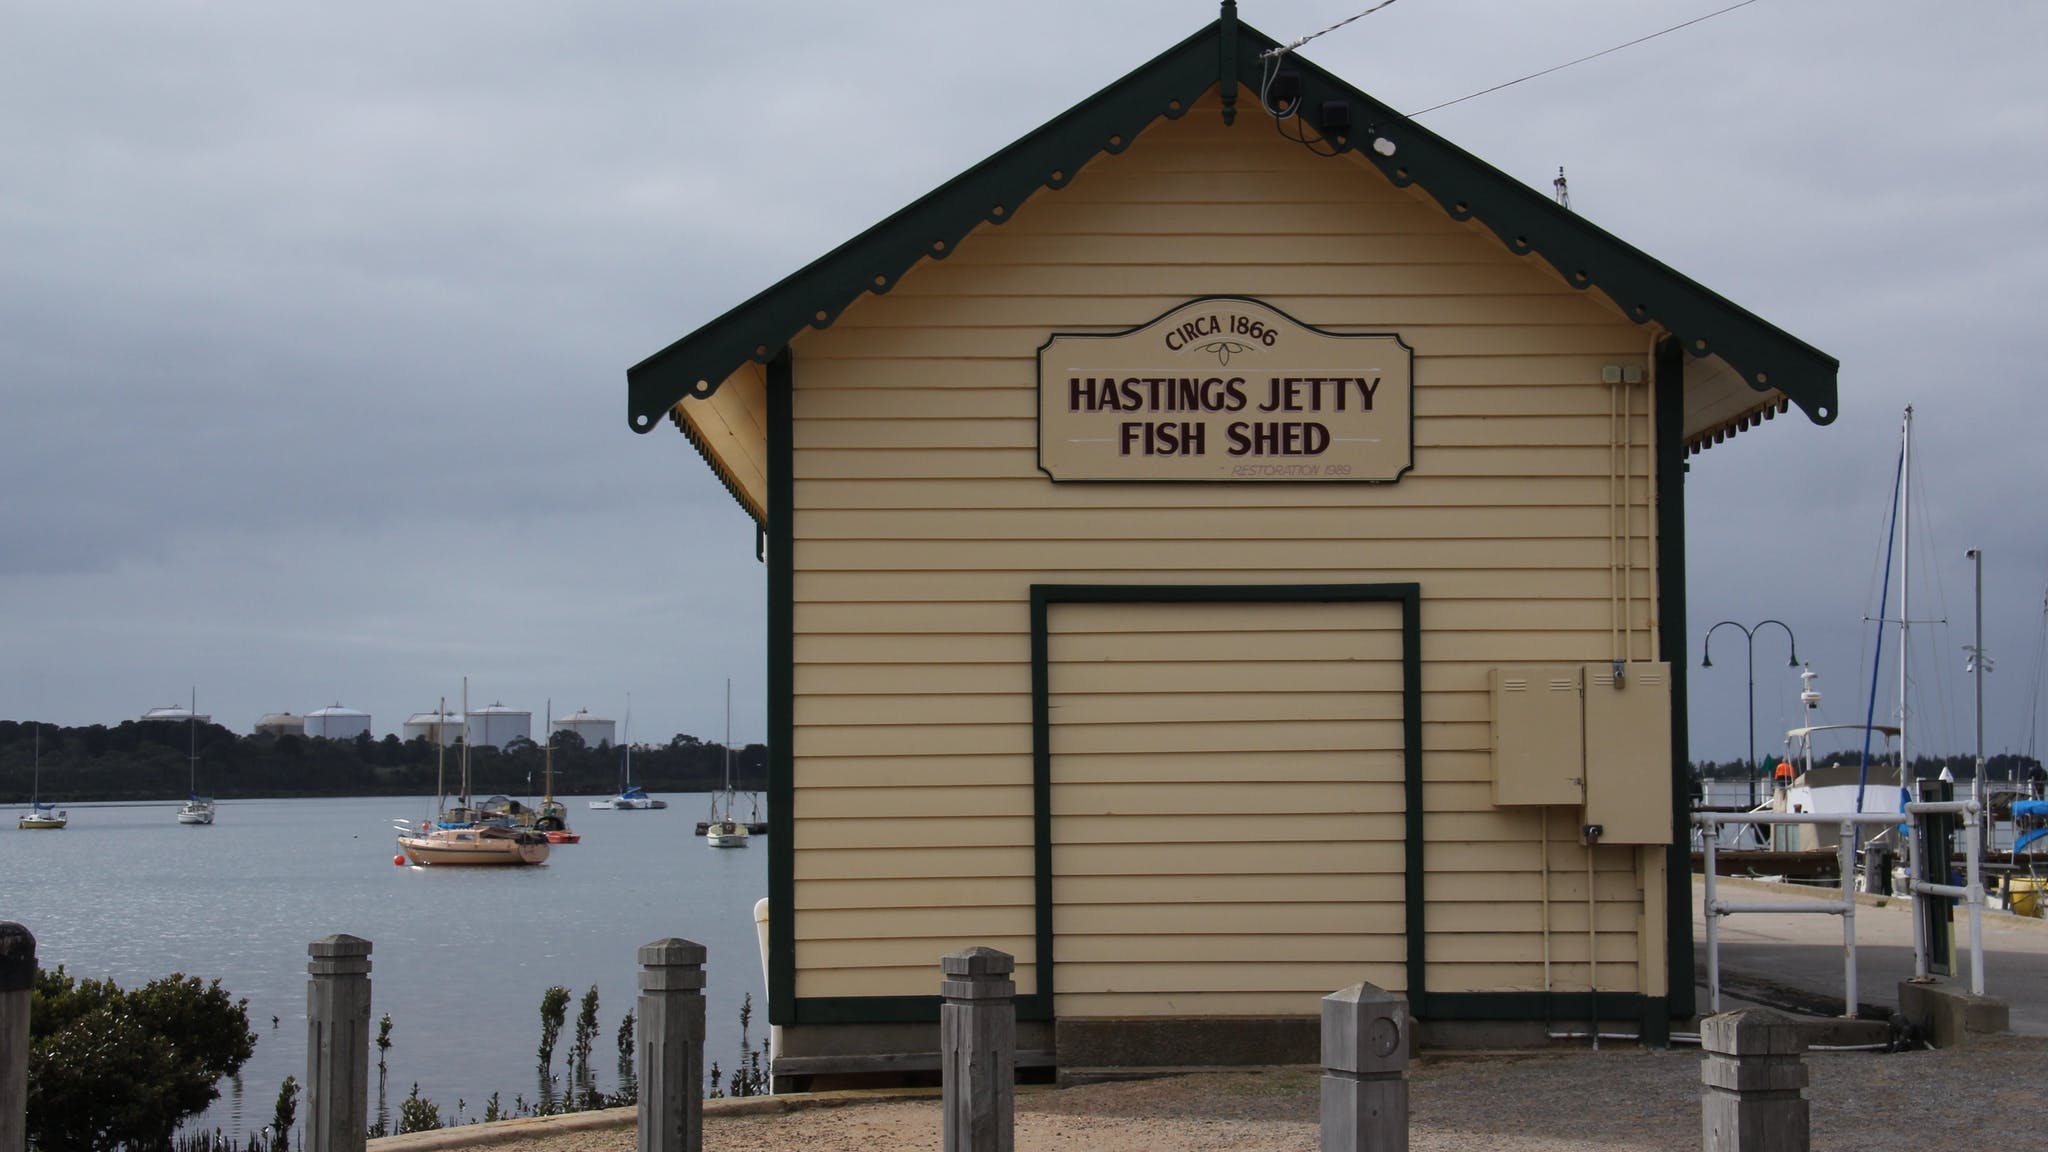 How Much Is My Home Worth In Hastings?